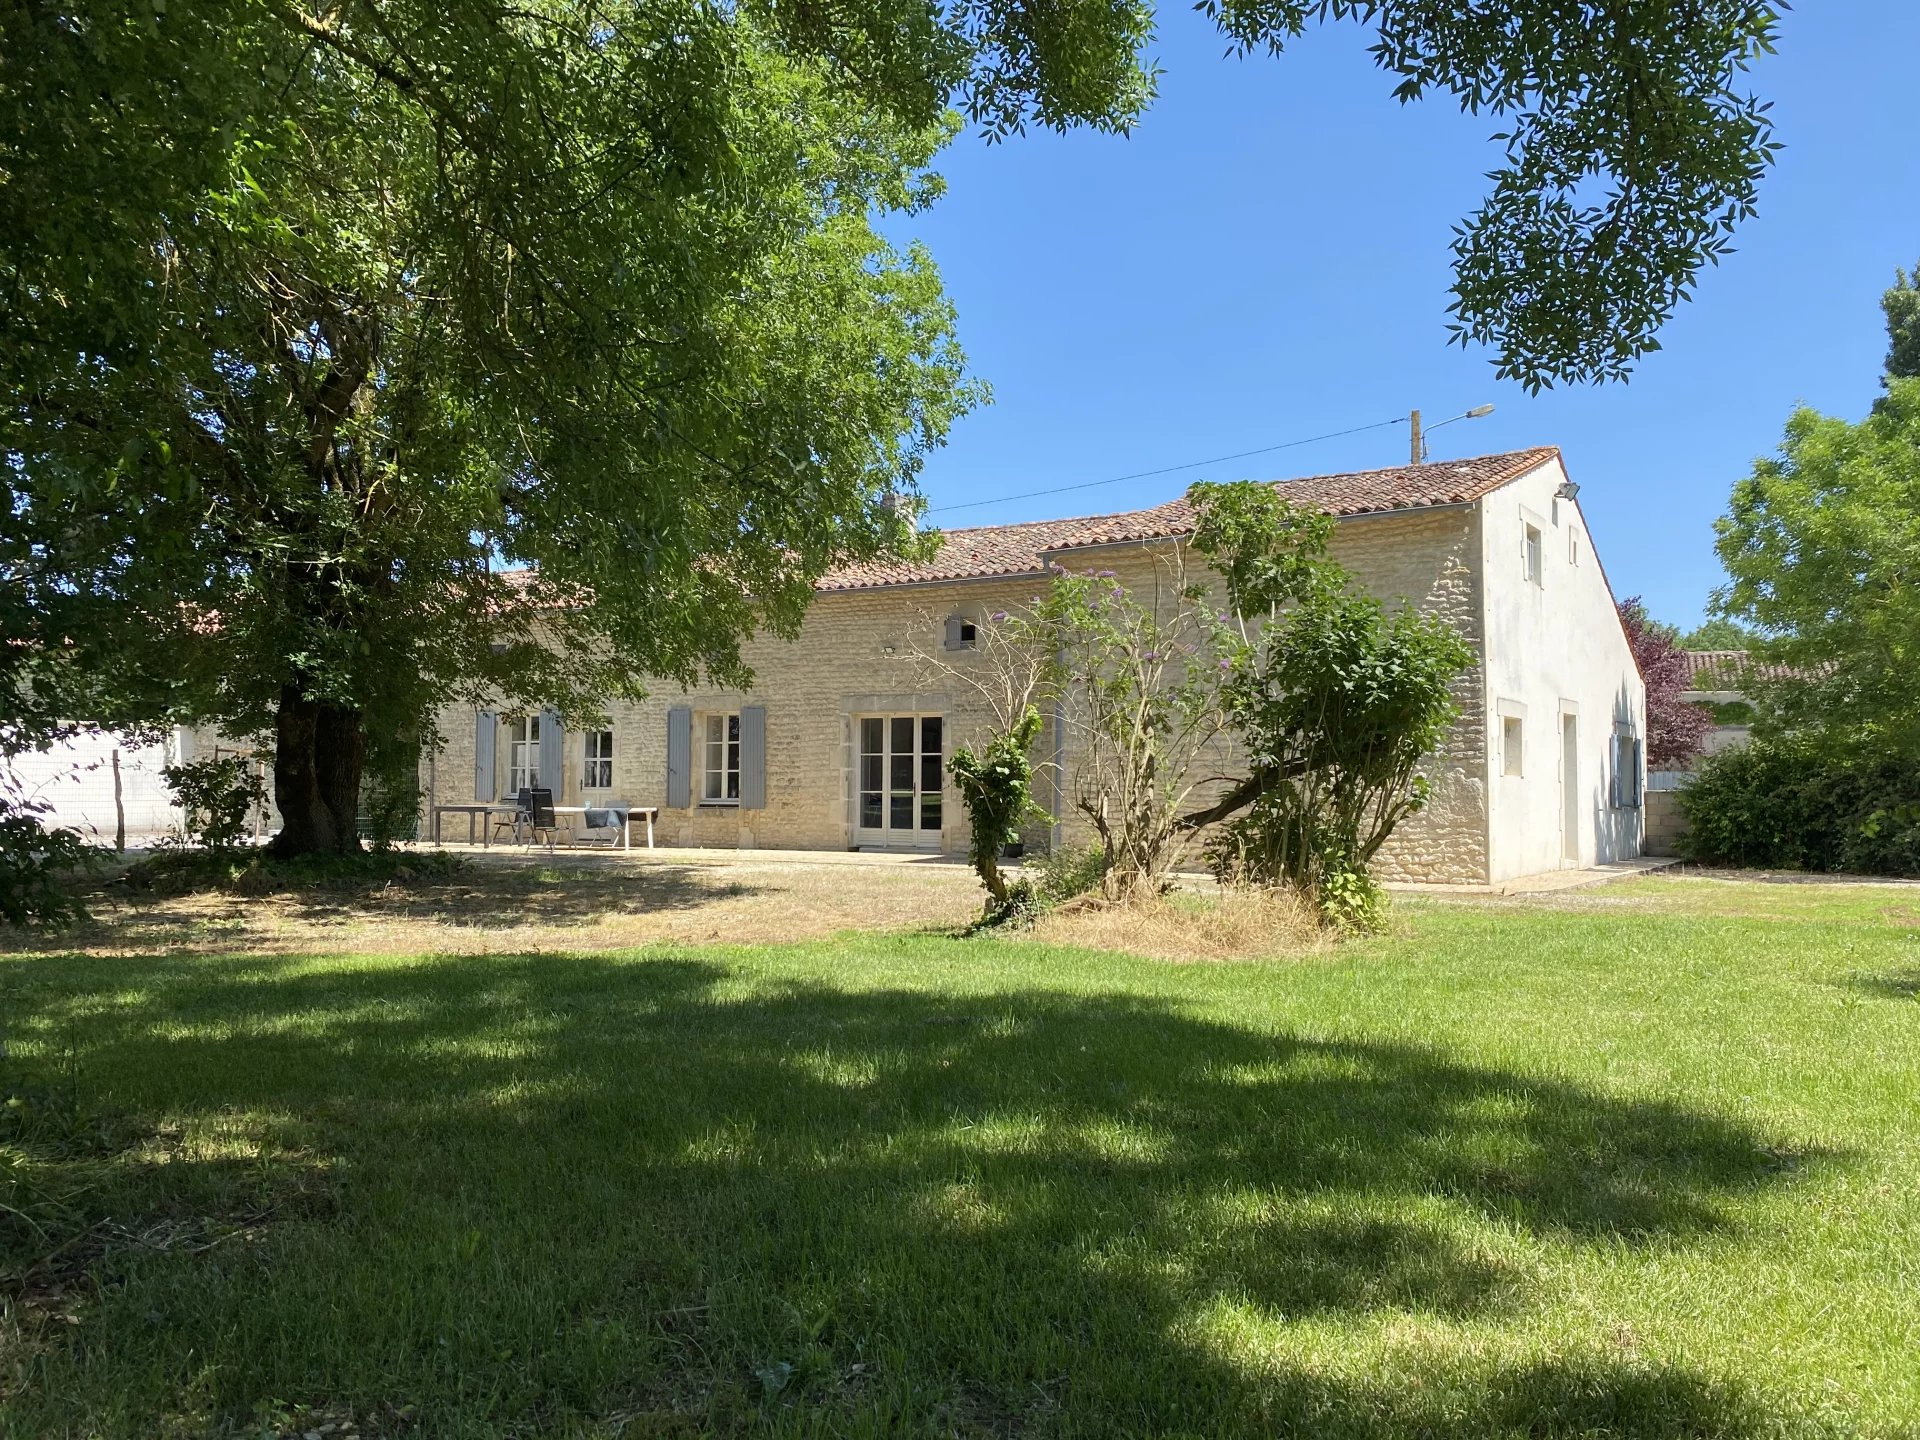 Lovely large country house, 3/4 bedrooms, 2 bathrooms, large garden & pool